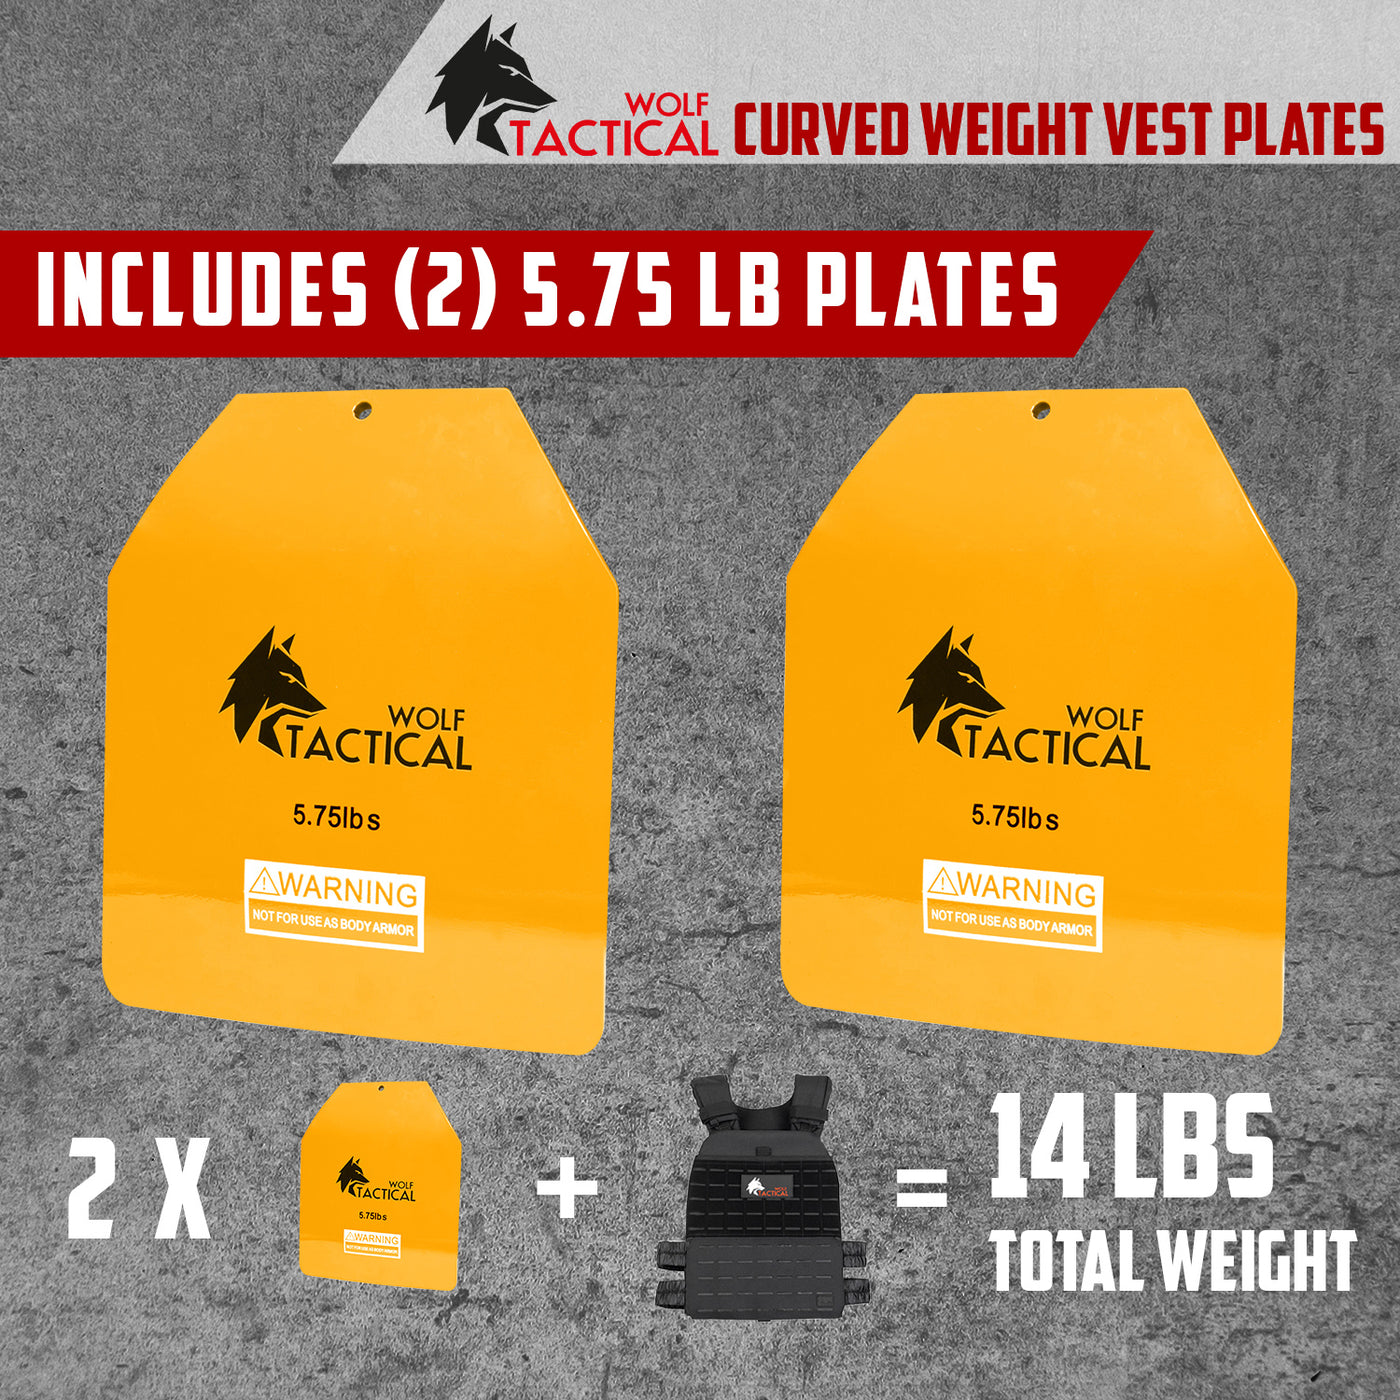 Curved Weight Vest Plates